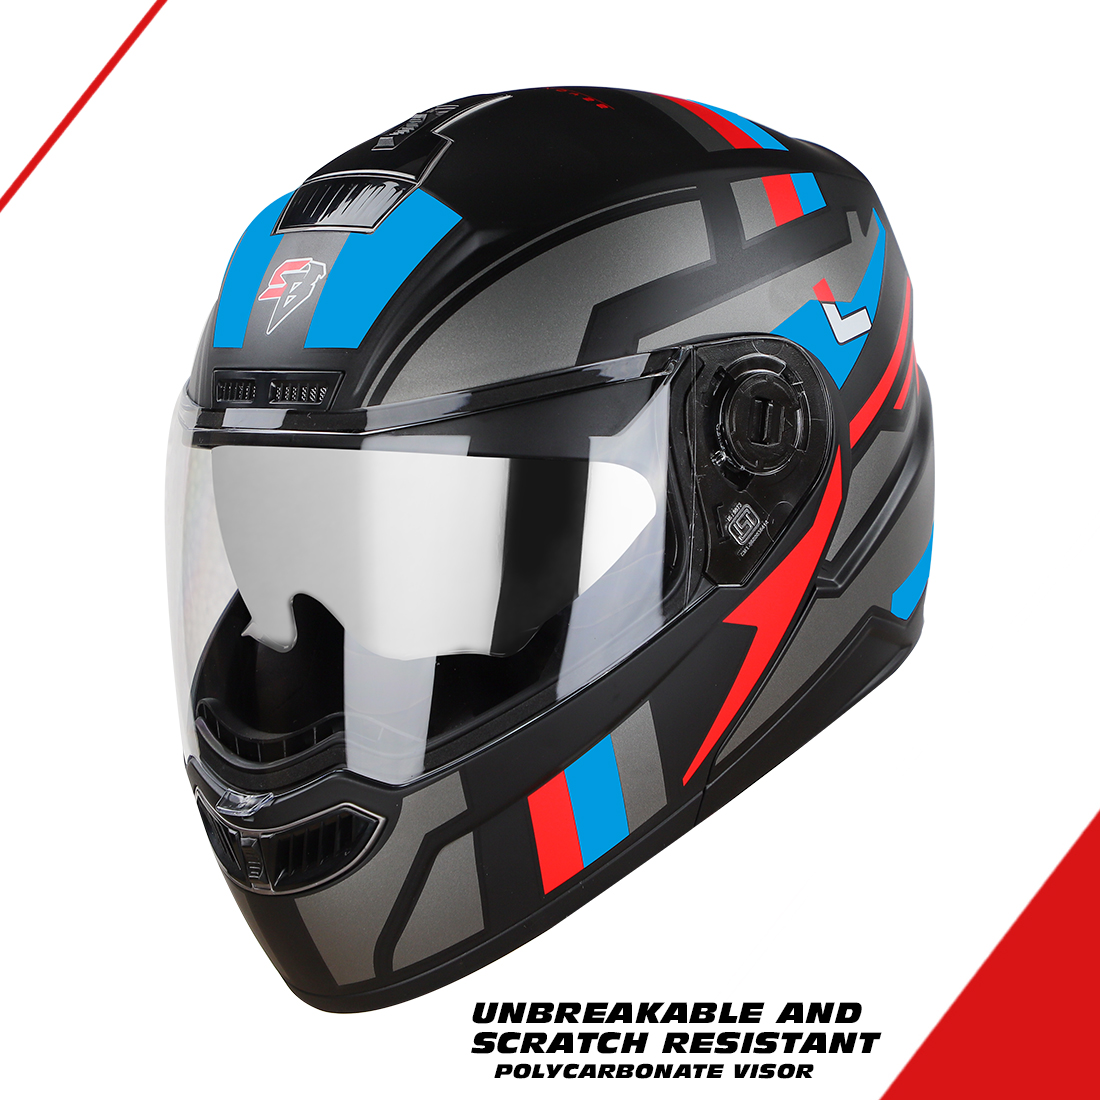 Steelbird SBA-7 Beyond Limit ISI Certified Flip-Up Helmet For Men And Women With Silver Sun Shield (Glossy Black Blue)